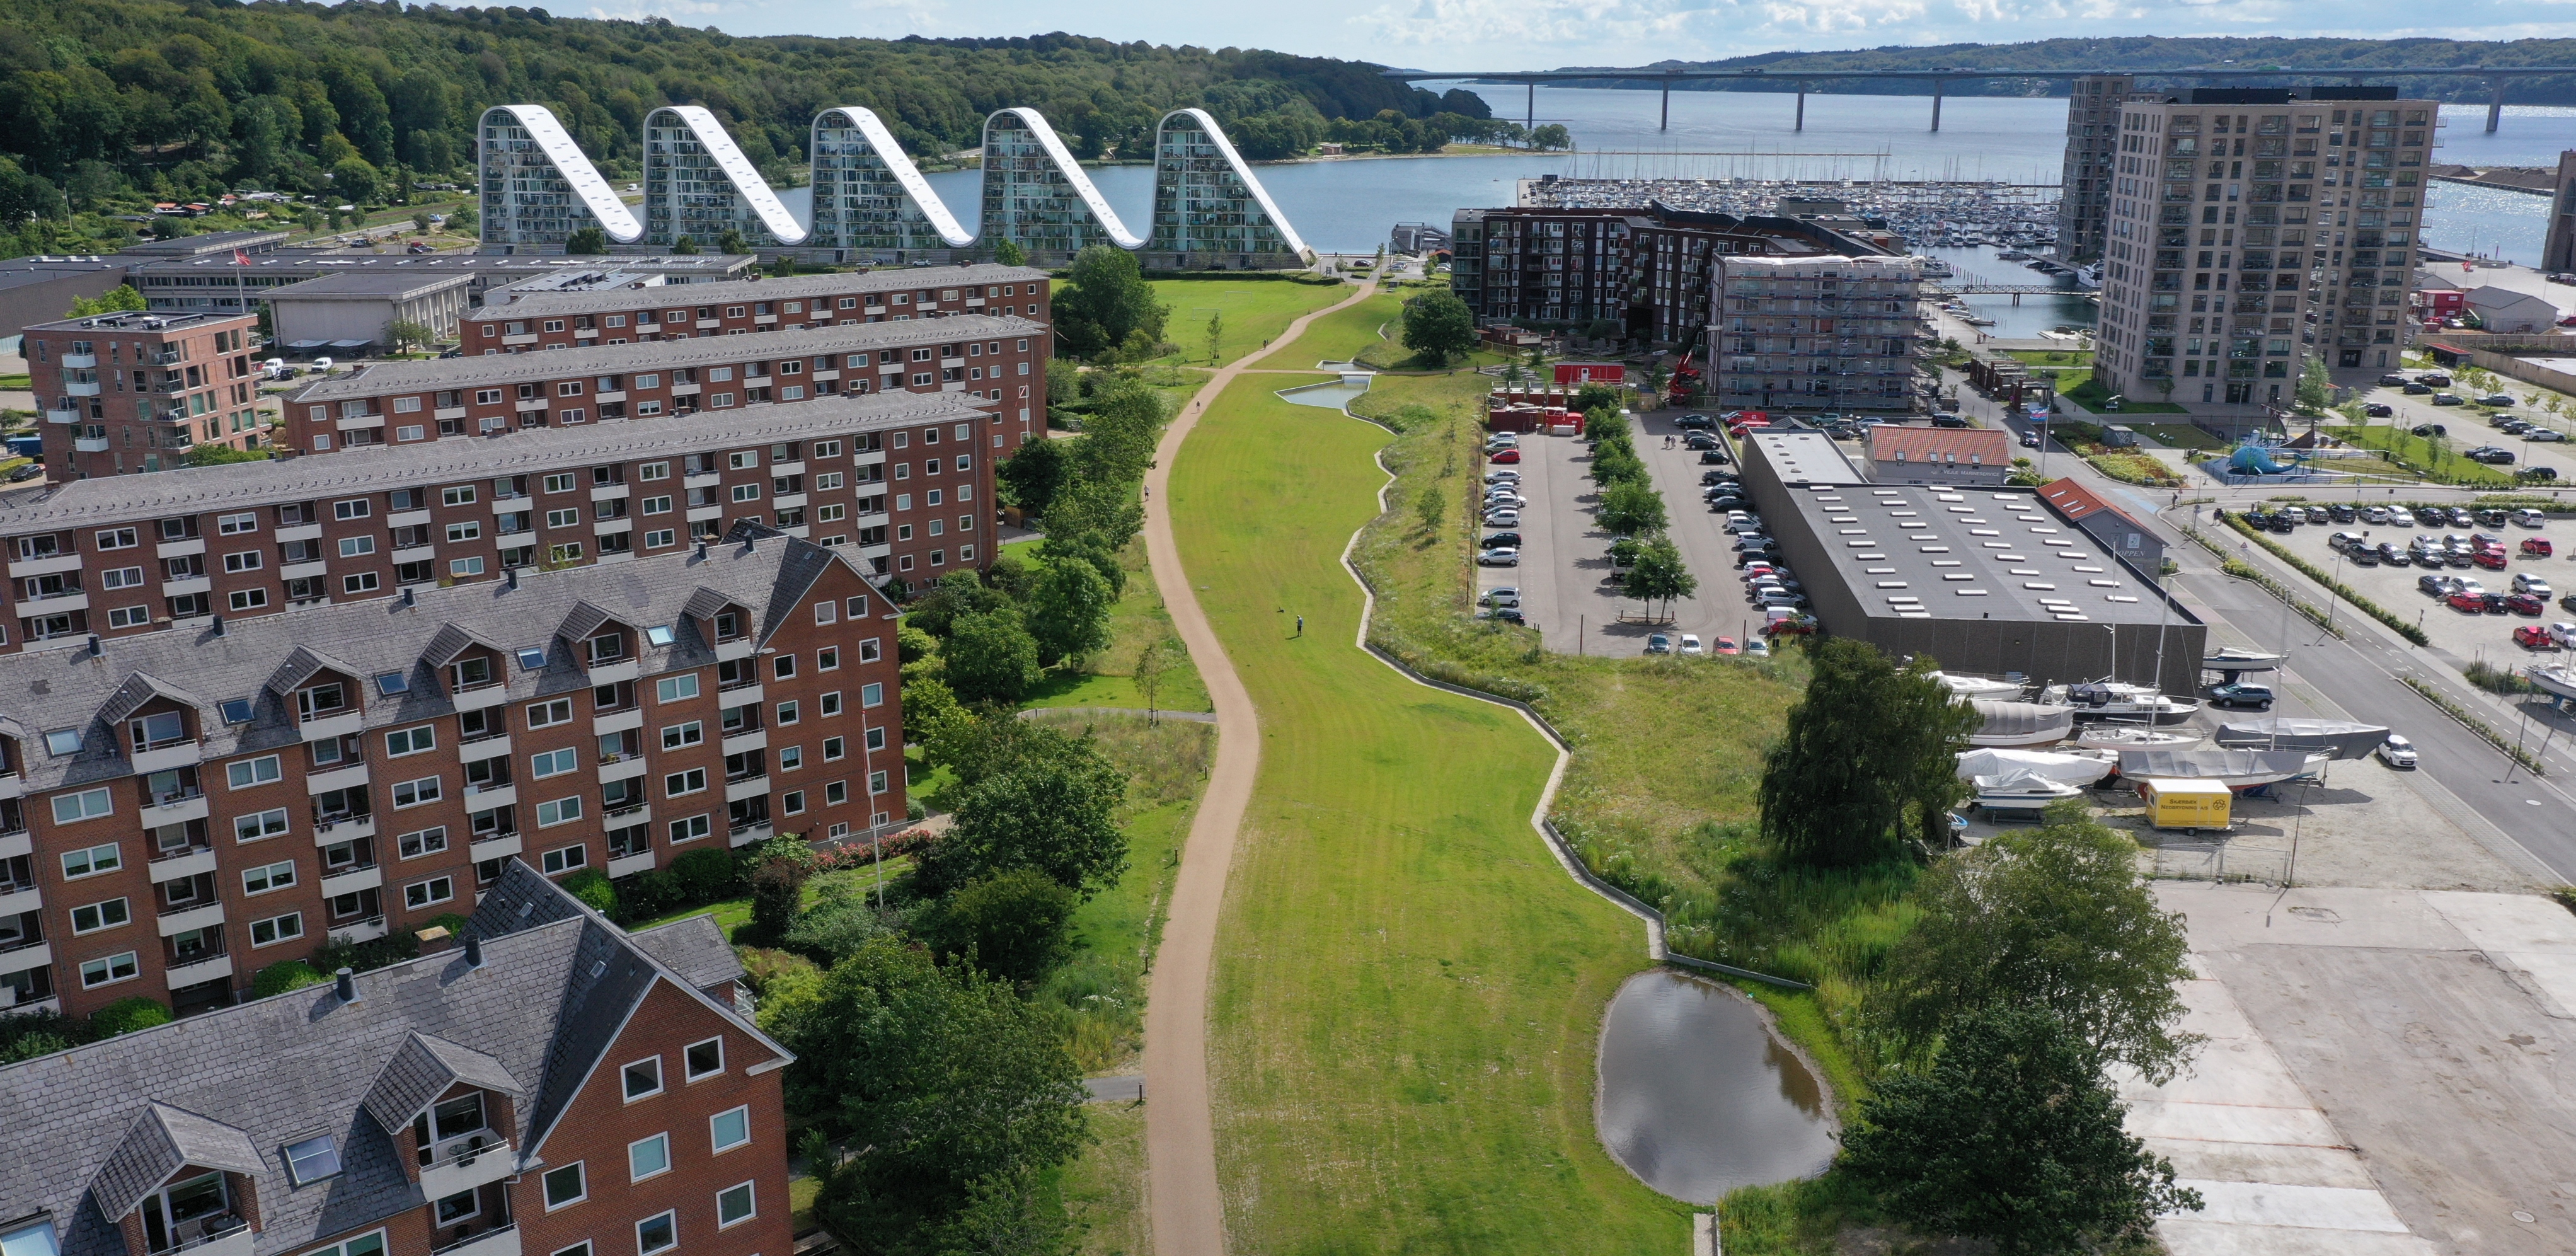 Climate park in Vejle to keep basements and roads dry